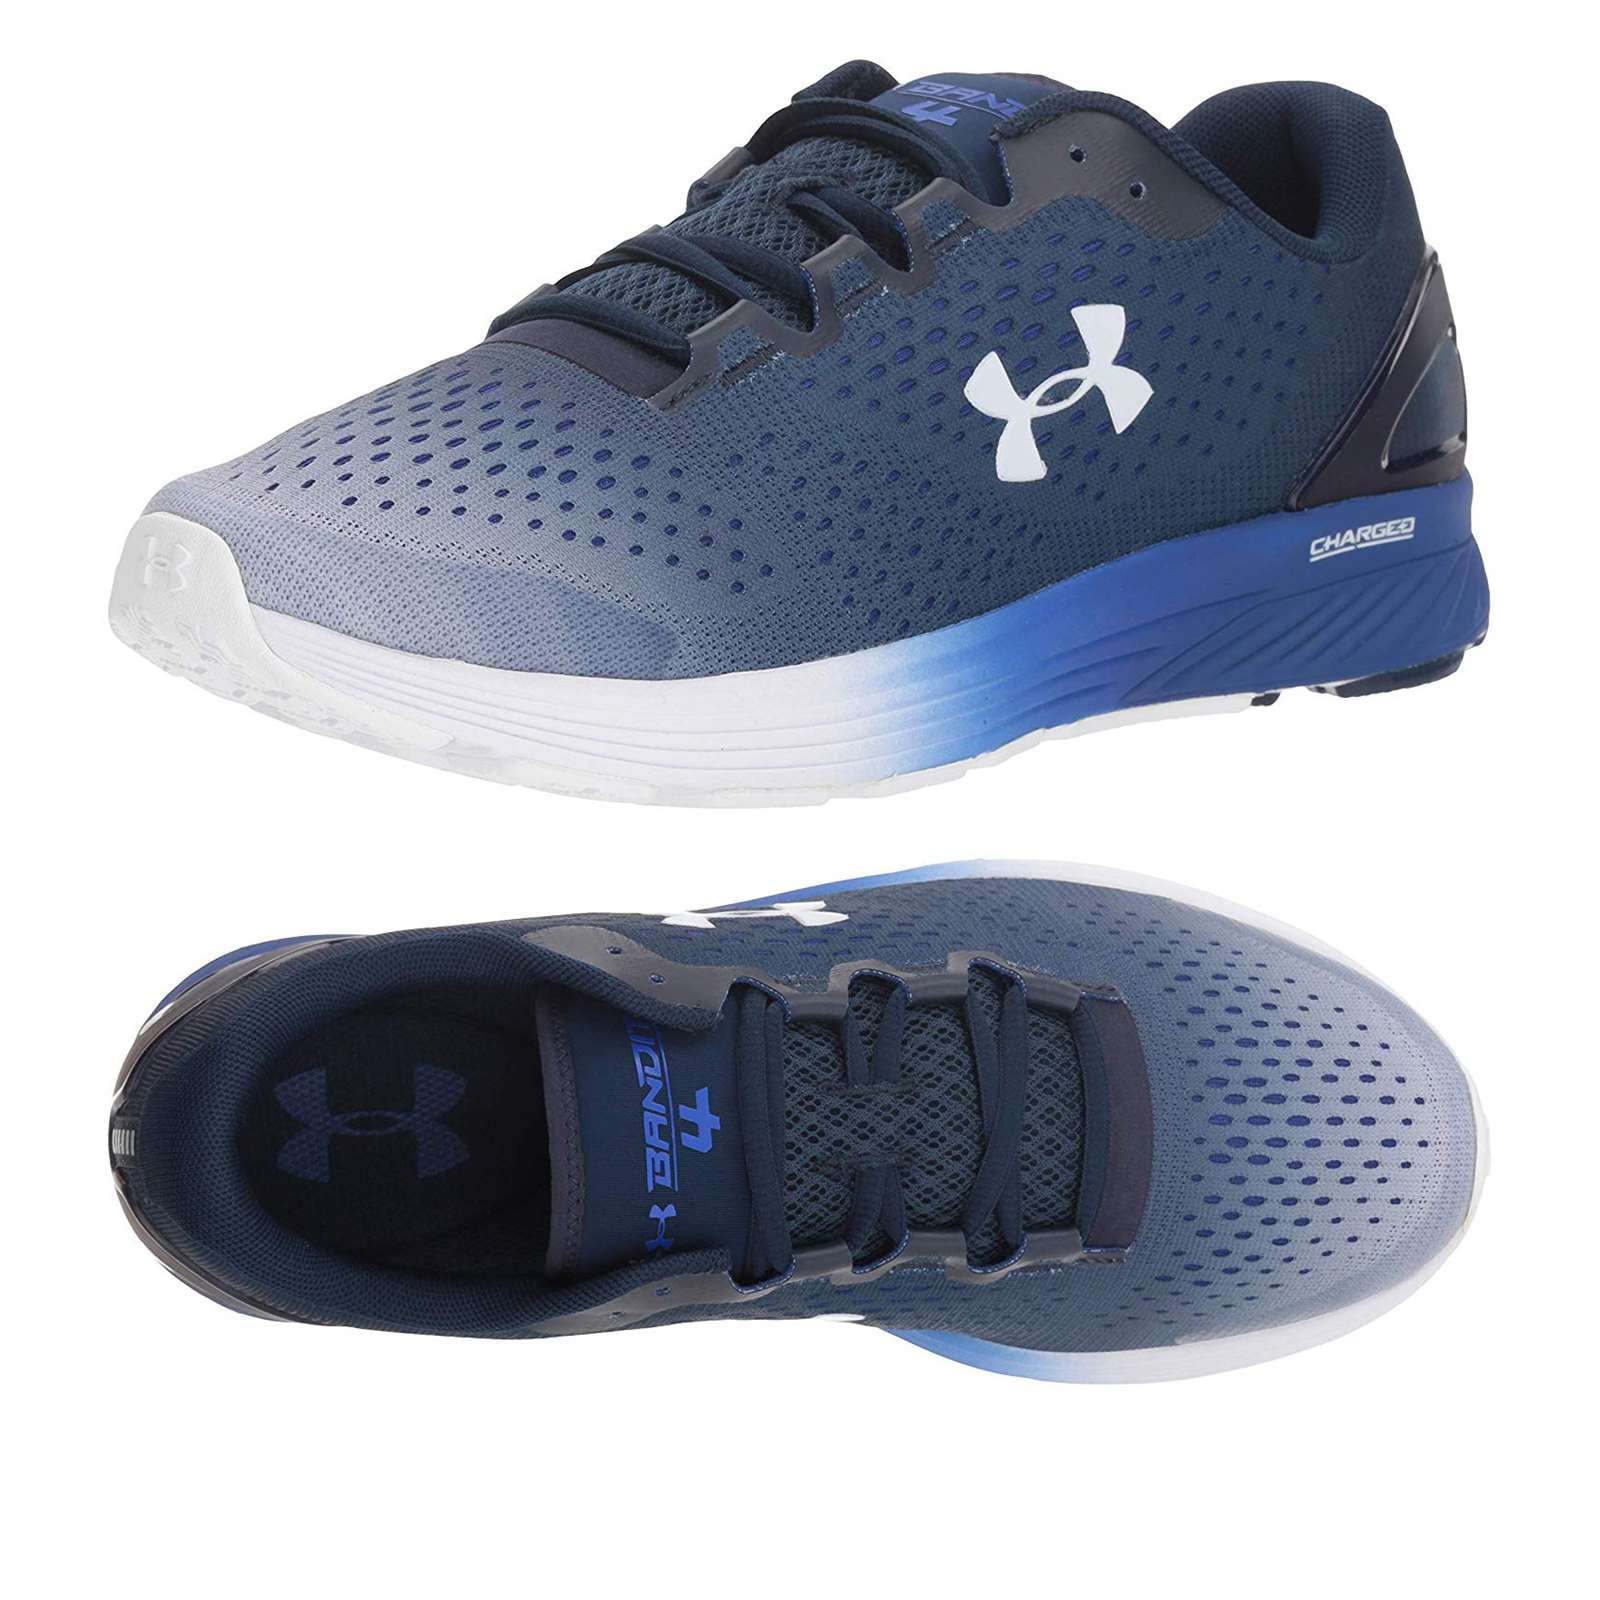 Under Armour Charged Bandit 4 Mens Running Shoes Navy Stylish Cushioned Run Shoe 